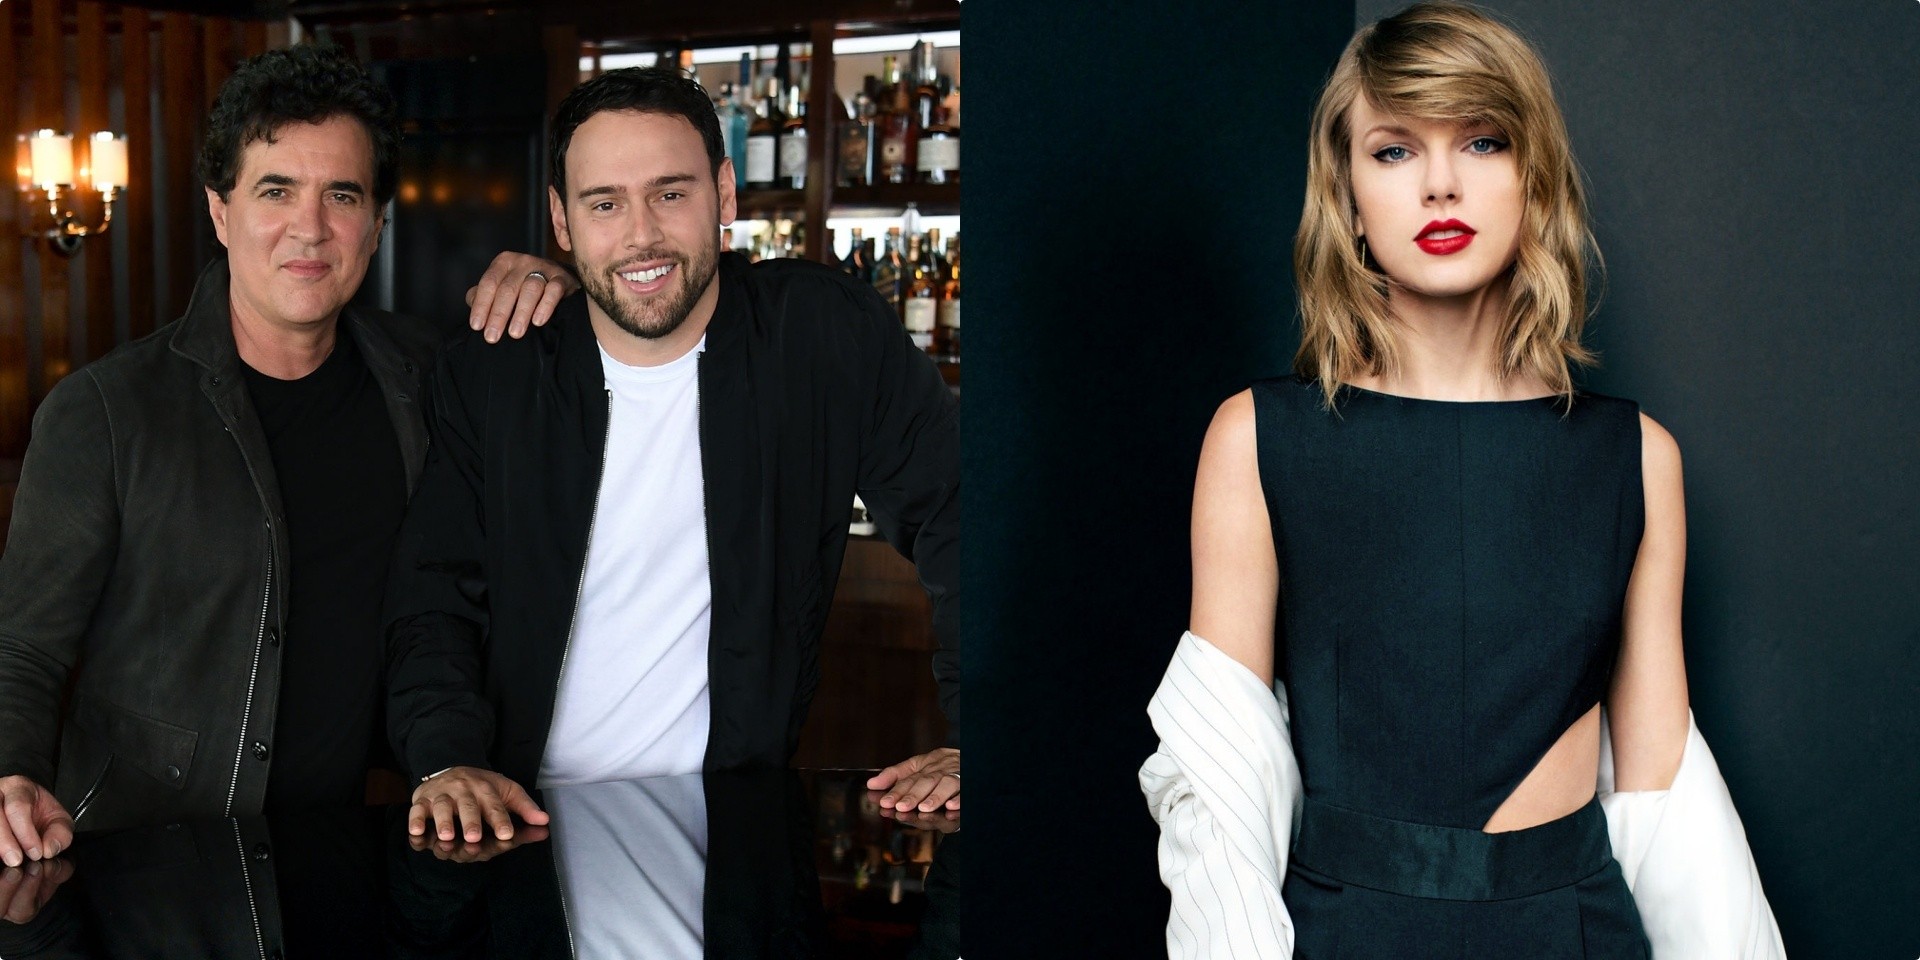 Scooter Braun’s Ithaca Holdings acquires Big Machine Label Group, gets slammed by Taylor Swift 